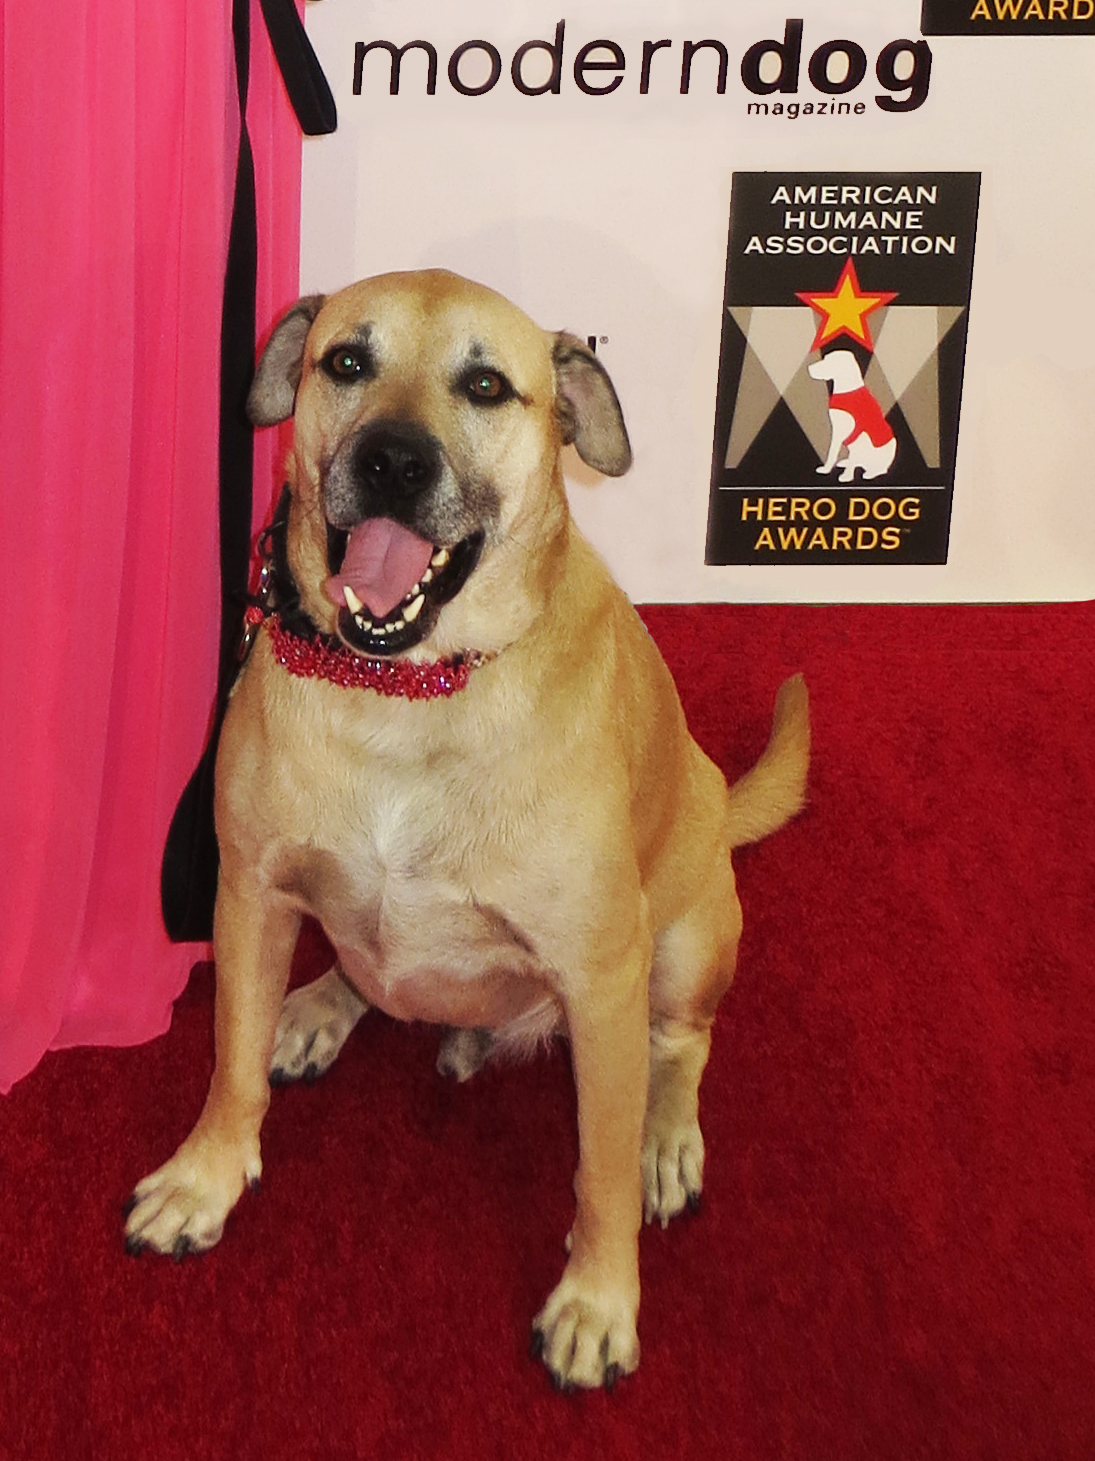 Super Smiley is the National Spokes-Dog for The American Humane Association Hero Dog Awards. Here he's on the Red Carpet at the 2013 Hero Dog Awards.